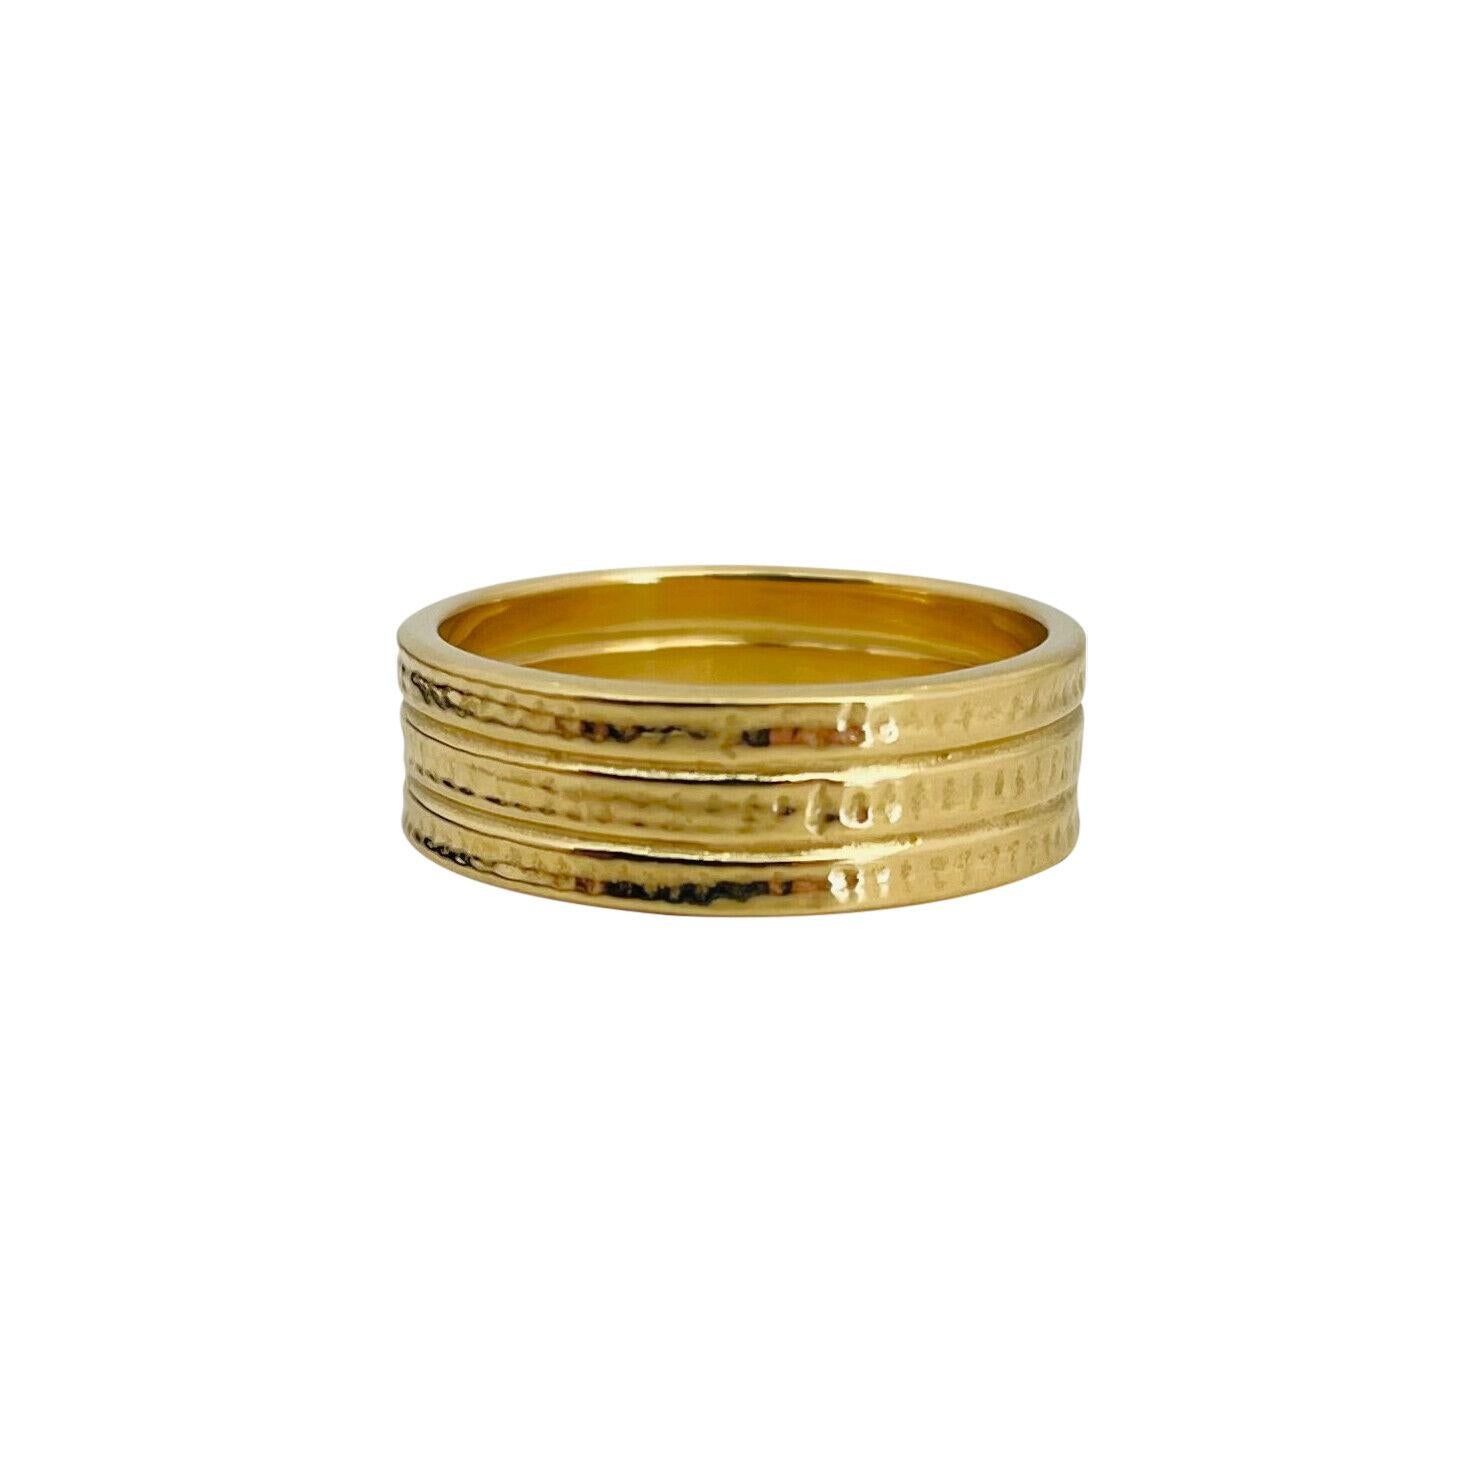 18k Yellow Gold 11.6g Solid 7.5mm Ribbed Band Ring Jane Koplewitz Size 11.5

Condition:  Excellent Condition, Professionally Cleaned and Polished
Metal:  18k Gold (Marked, and Professionally Tested)
Weight:  11.6g
Width:  7.5mm
Size	: 